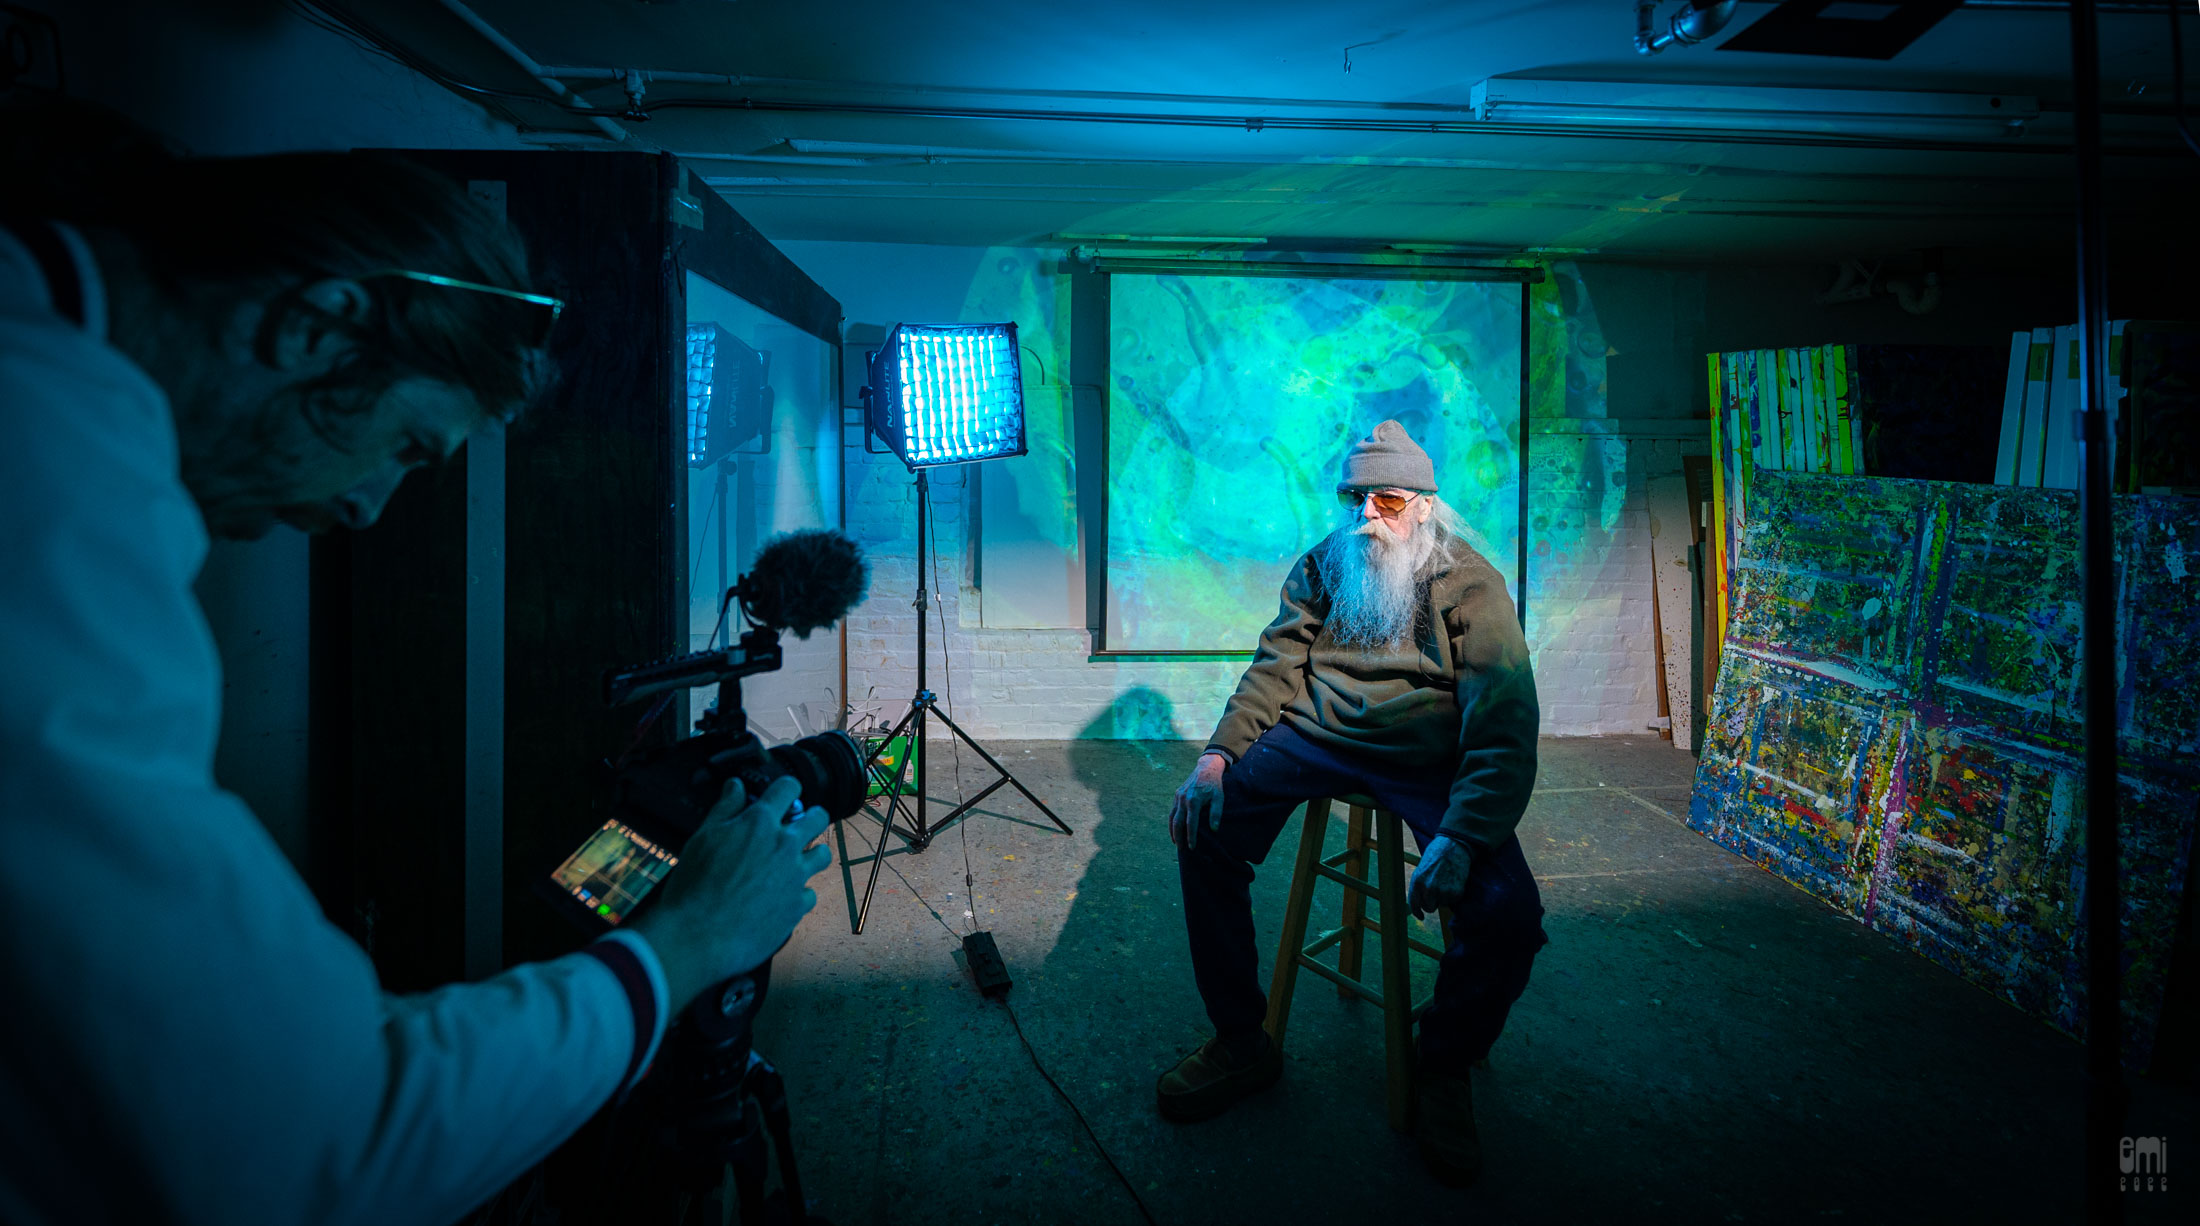 20220607 Filming Bill Ham for a Feature-Length Documentary  "Over Head; the History of California's Psychedelic Light Show" by John Warren at his Studio in San Francisco, CA. photo by emi